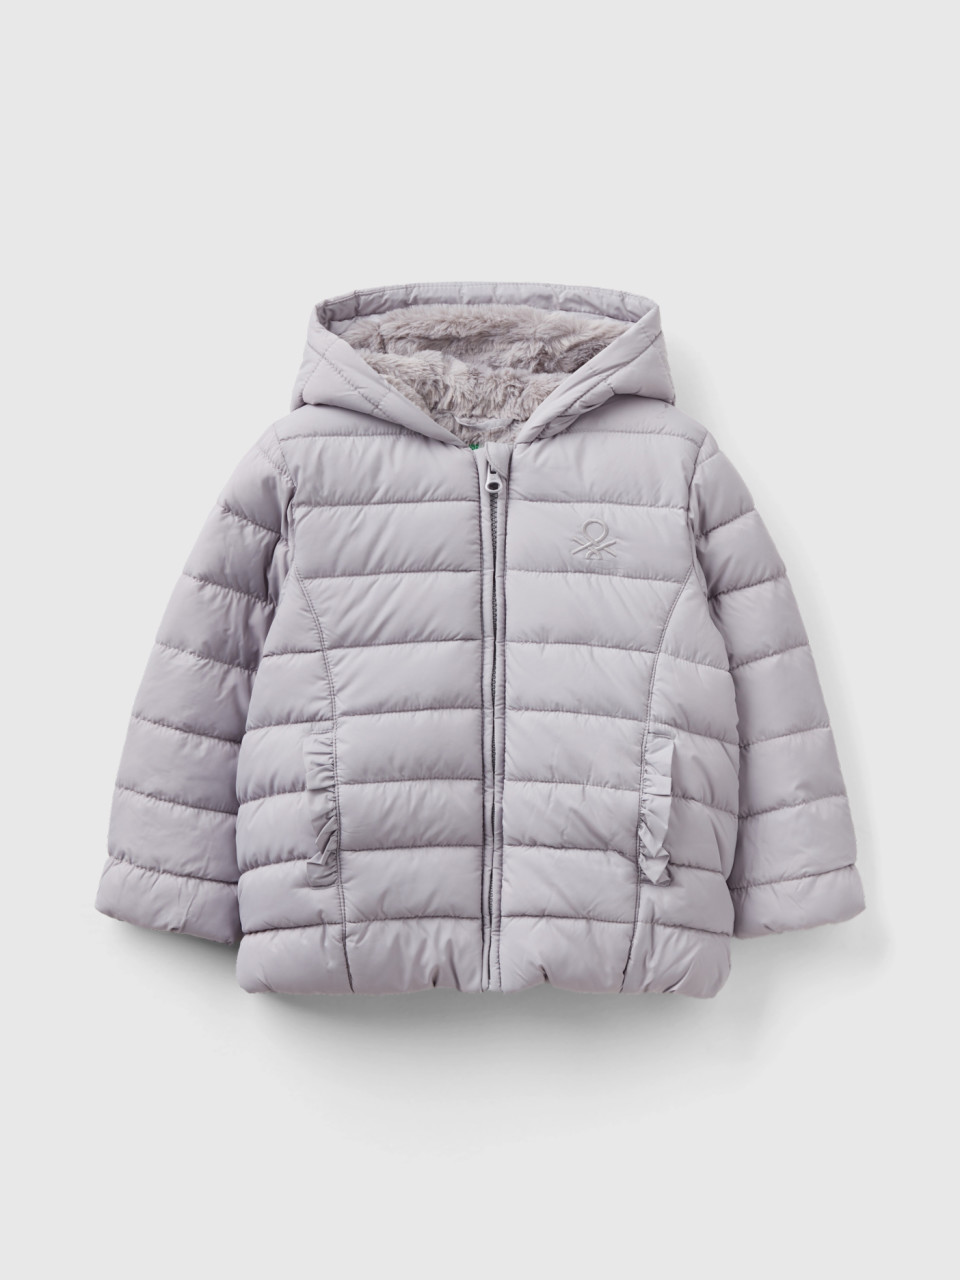 Benetton, Padded Jacket With Rouches, Light Gray, Kids